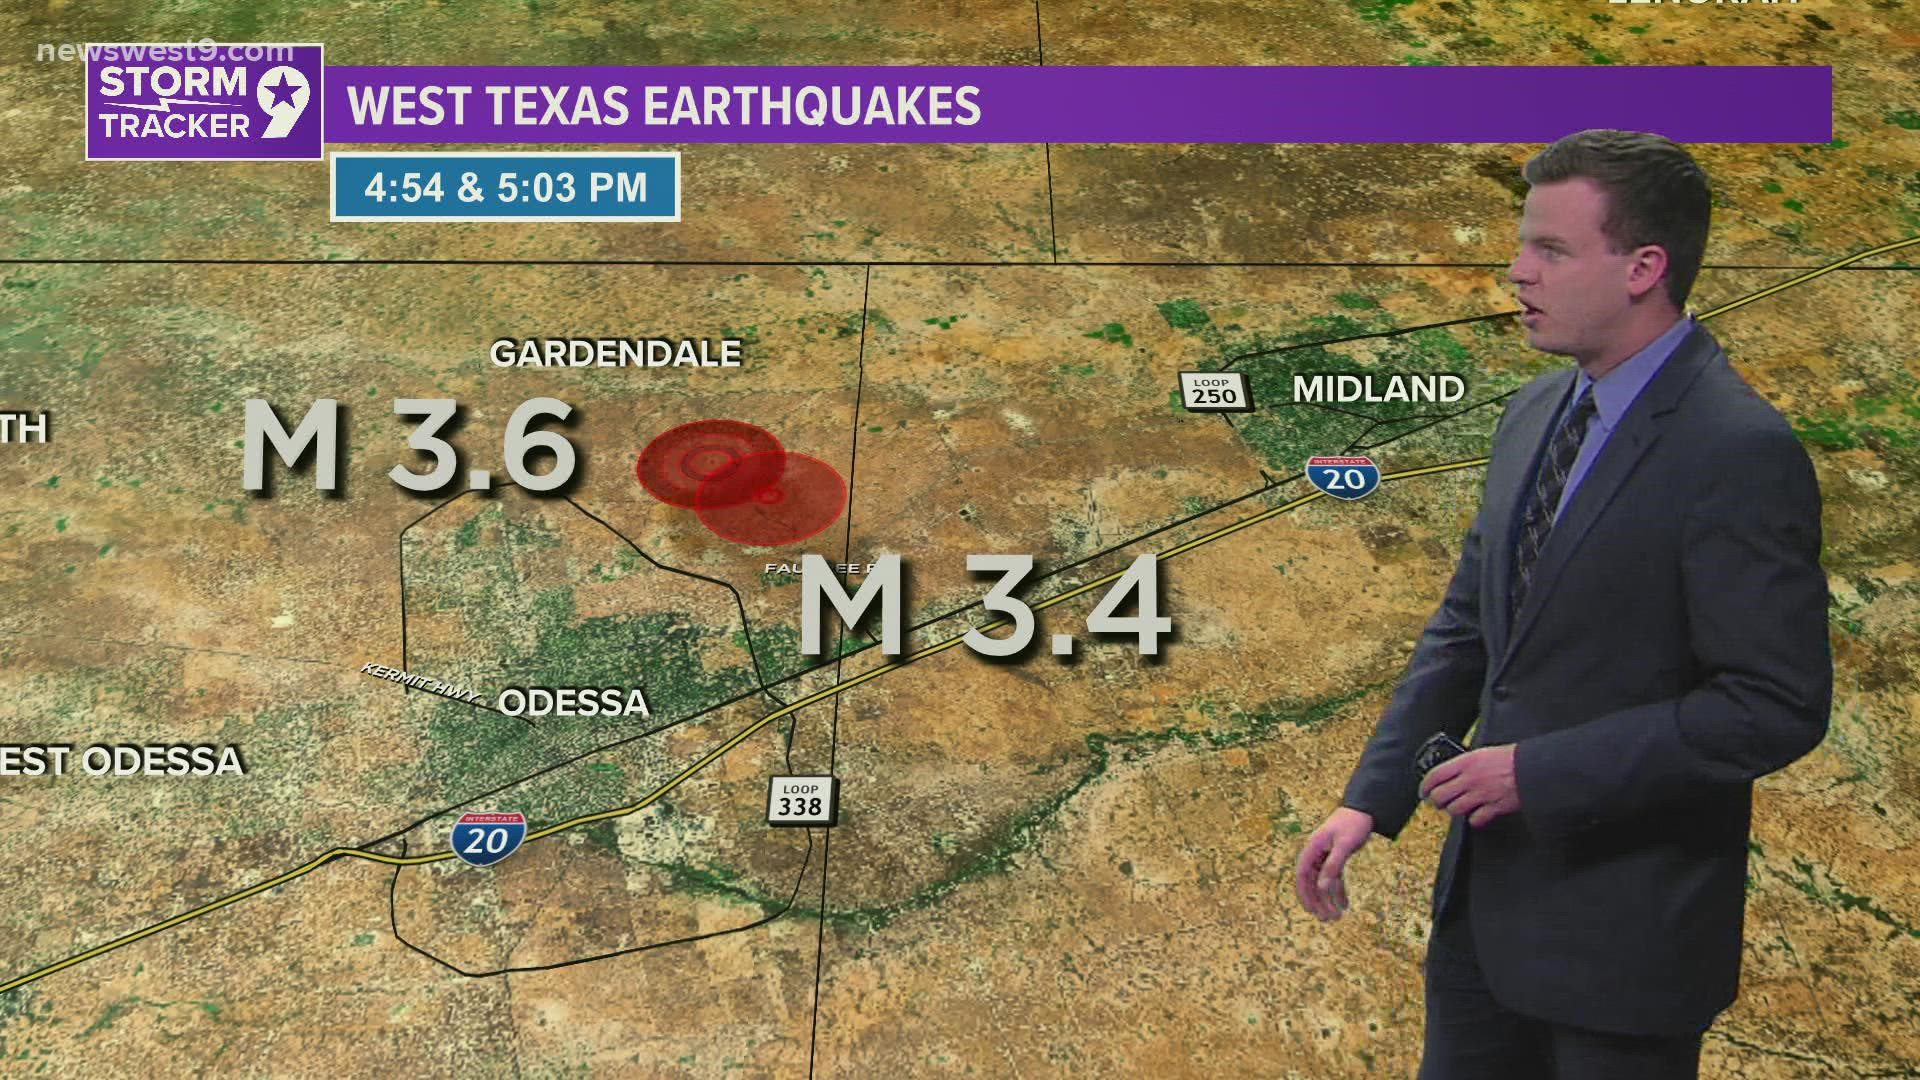 Multiple viewers have reached out to NewsWest 9 saying they felt the initial 3.4 quake, as well as the 3.6 aftershock.